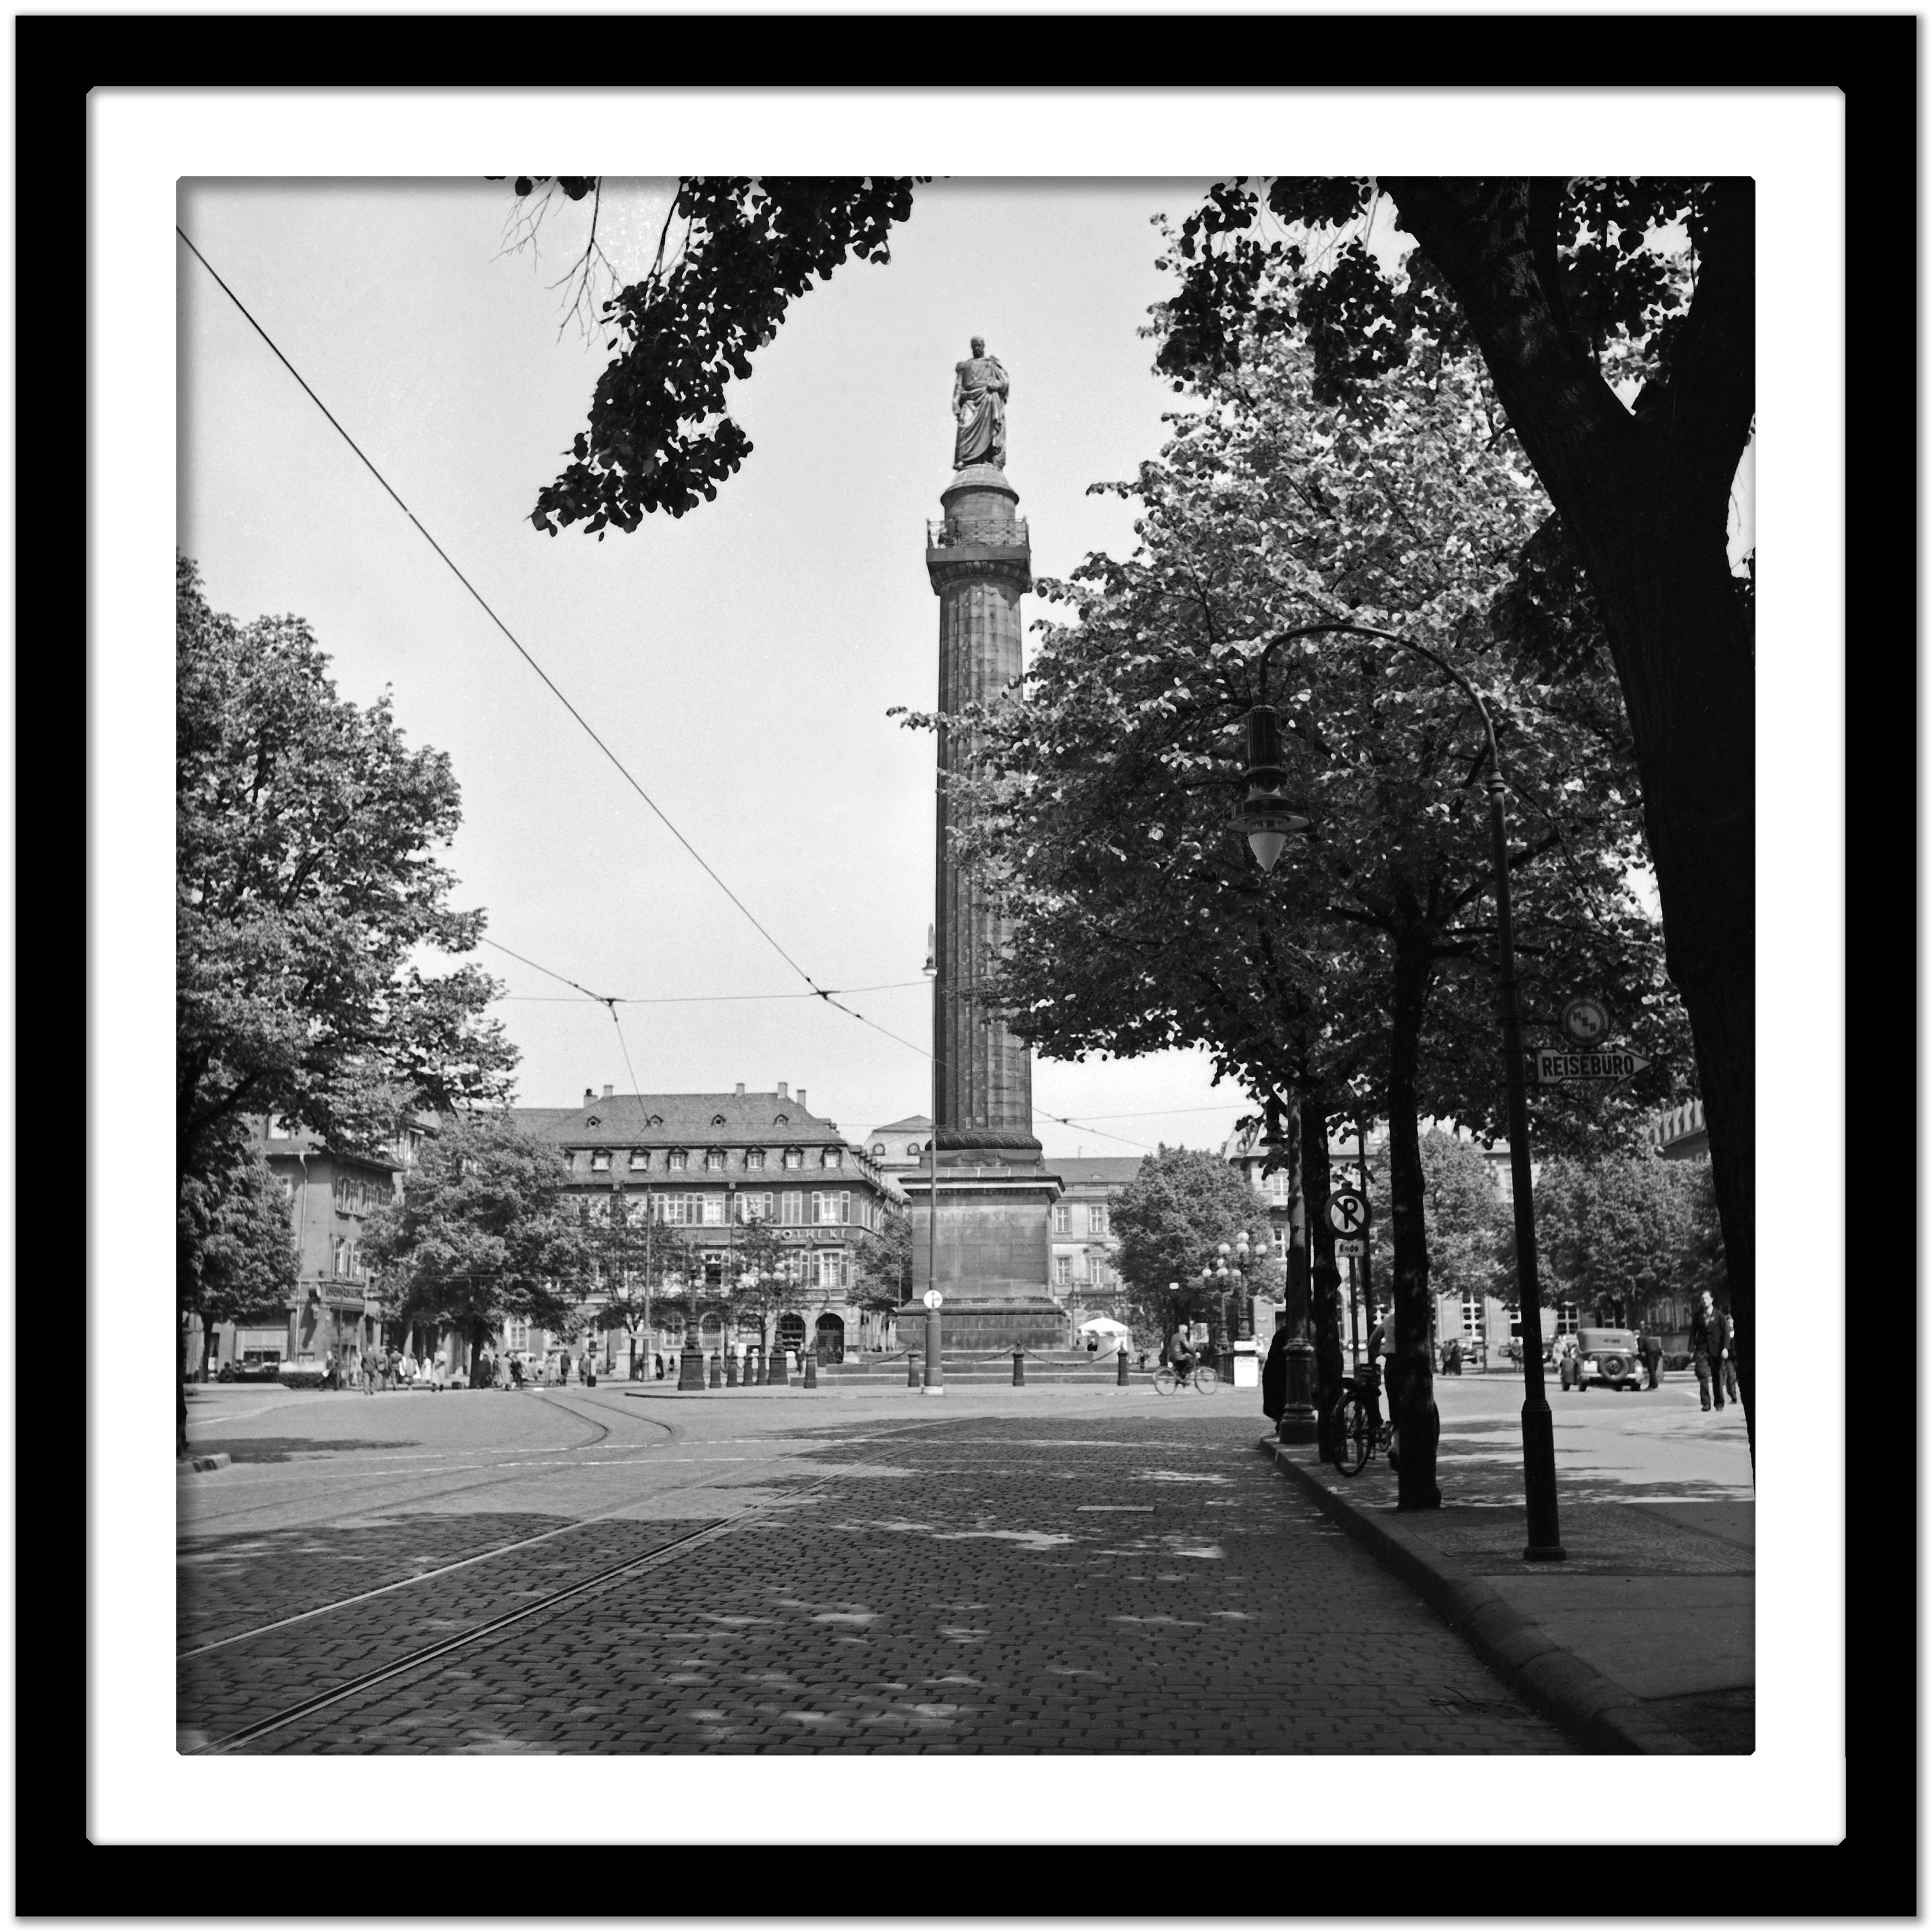 Ludwig's column at Luisenplatz square at Darmstadt, Germany 1938 Printed Later  - Modern Photograph by Karl Heinrich Lämmel